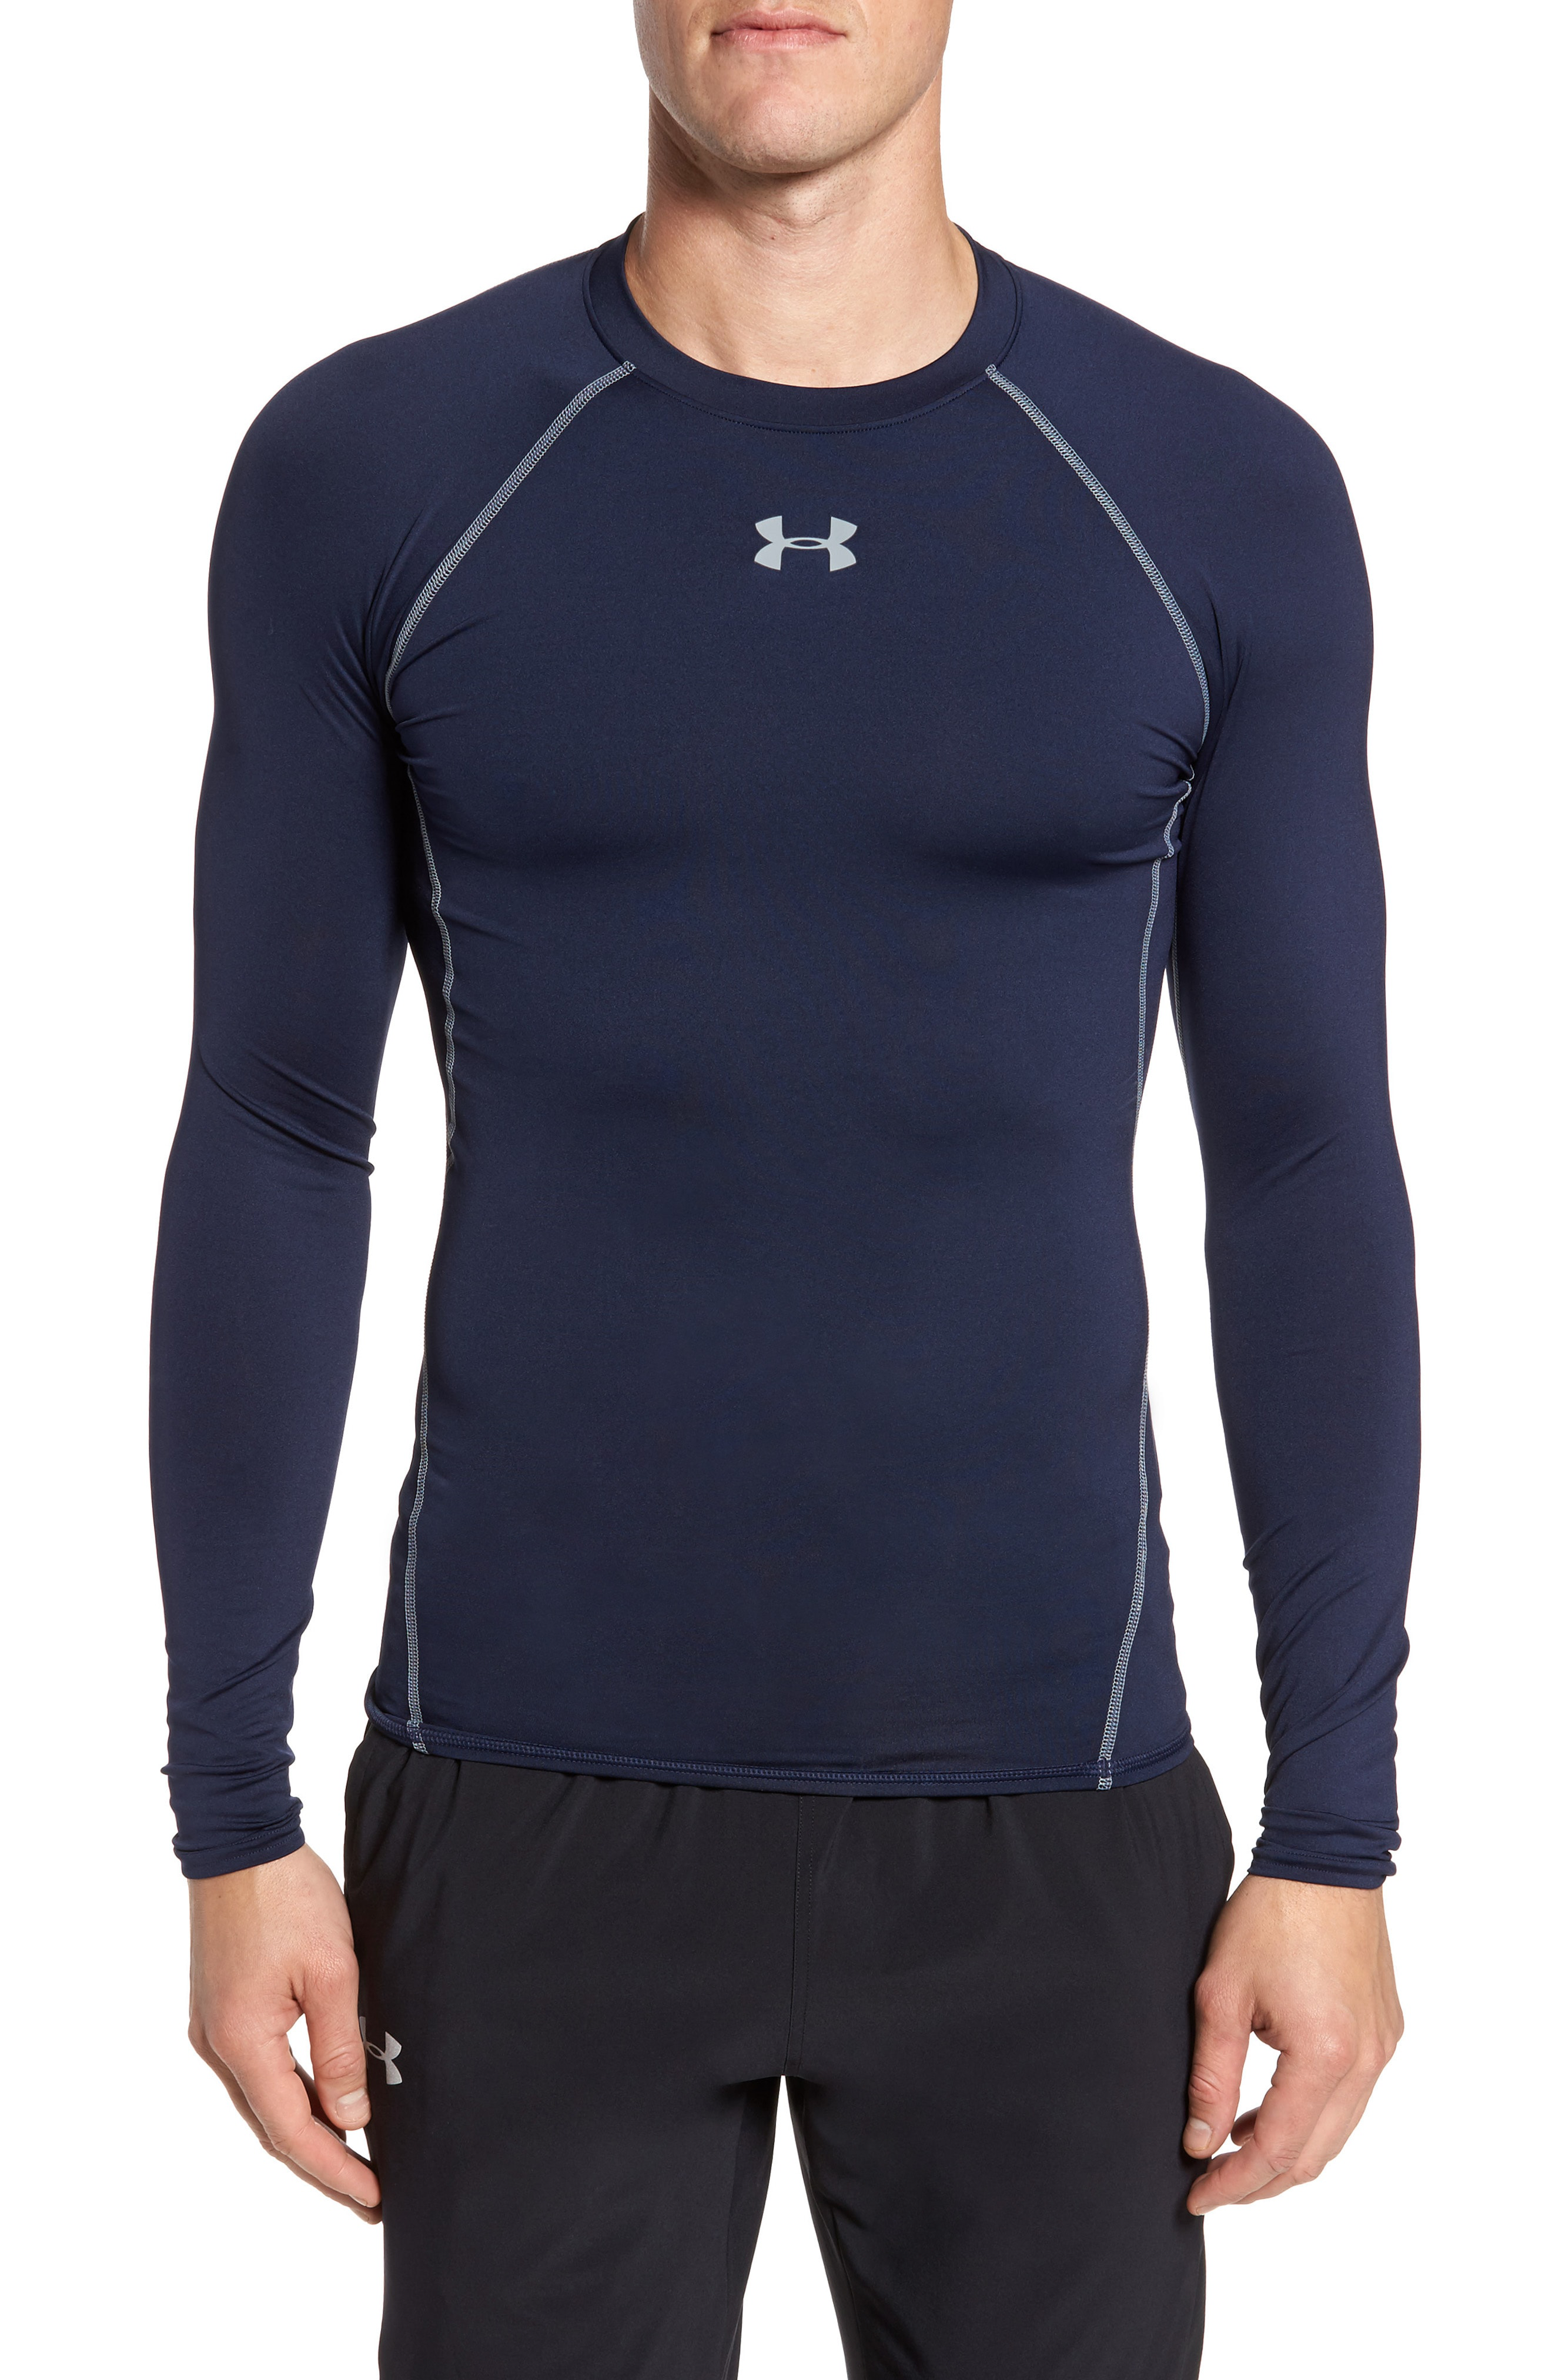 under armour navy compression shirt